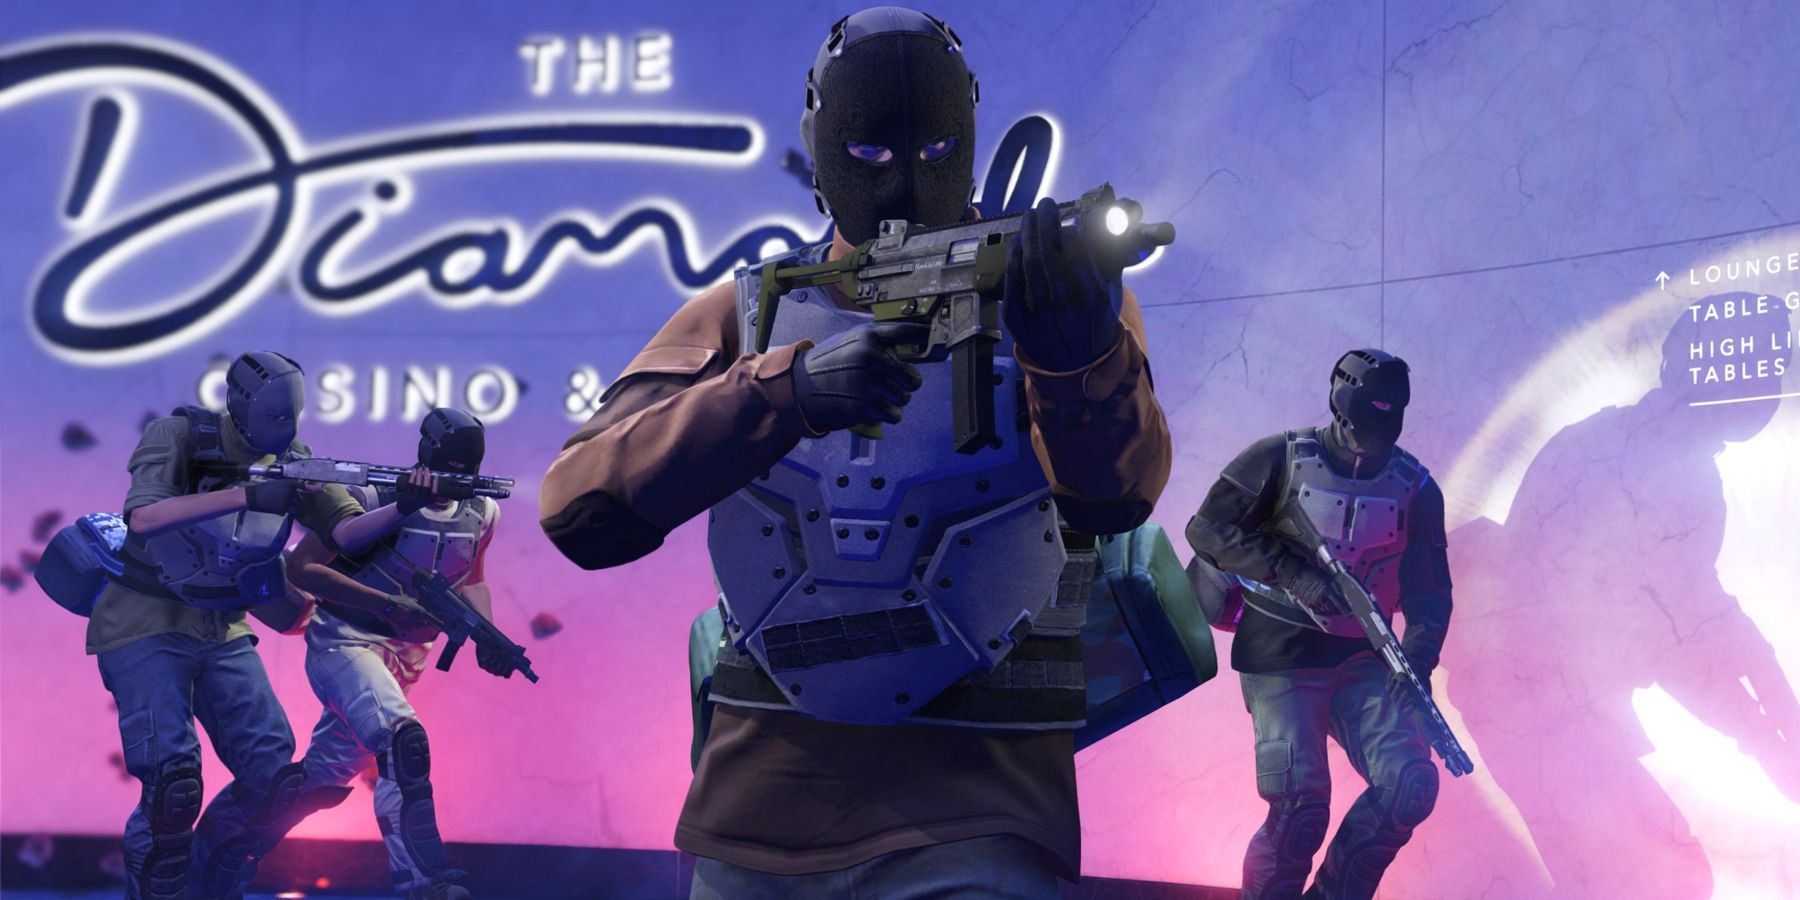 Promo image for the GTA Online Diamond Casino heist which shows heavily armed people raiding the casino floor.